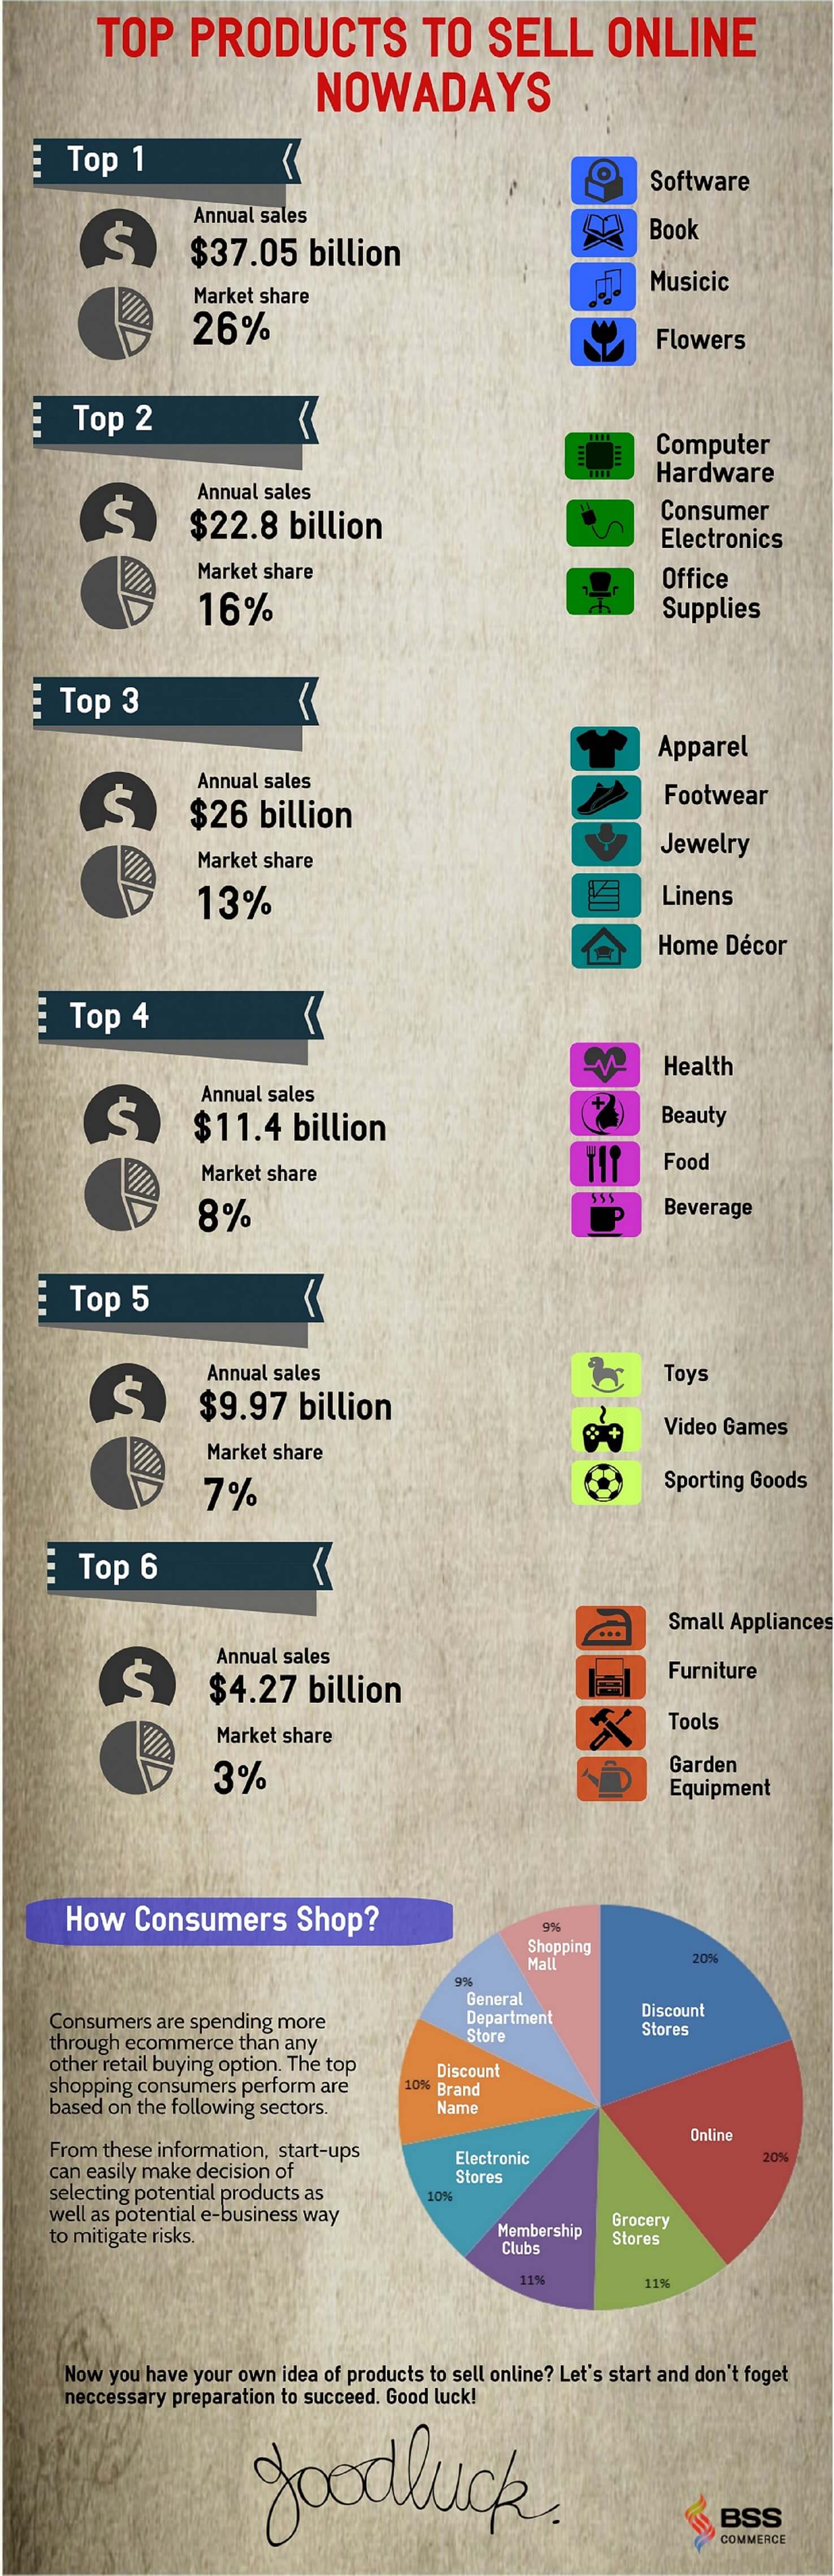 E Commerce Today Top Products To Sell Online Infographic